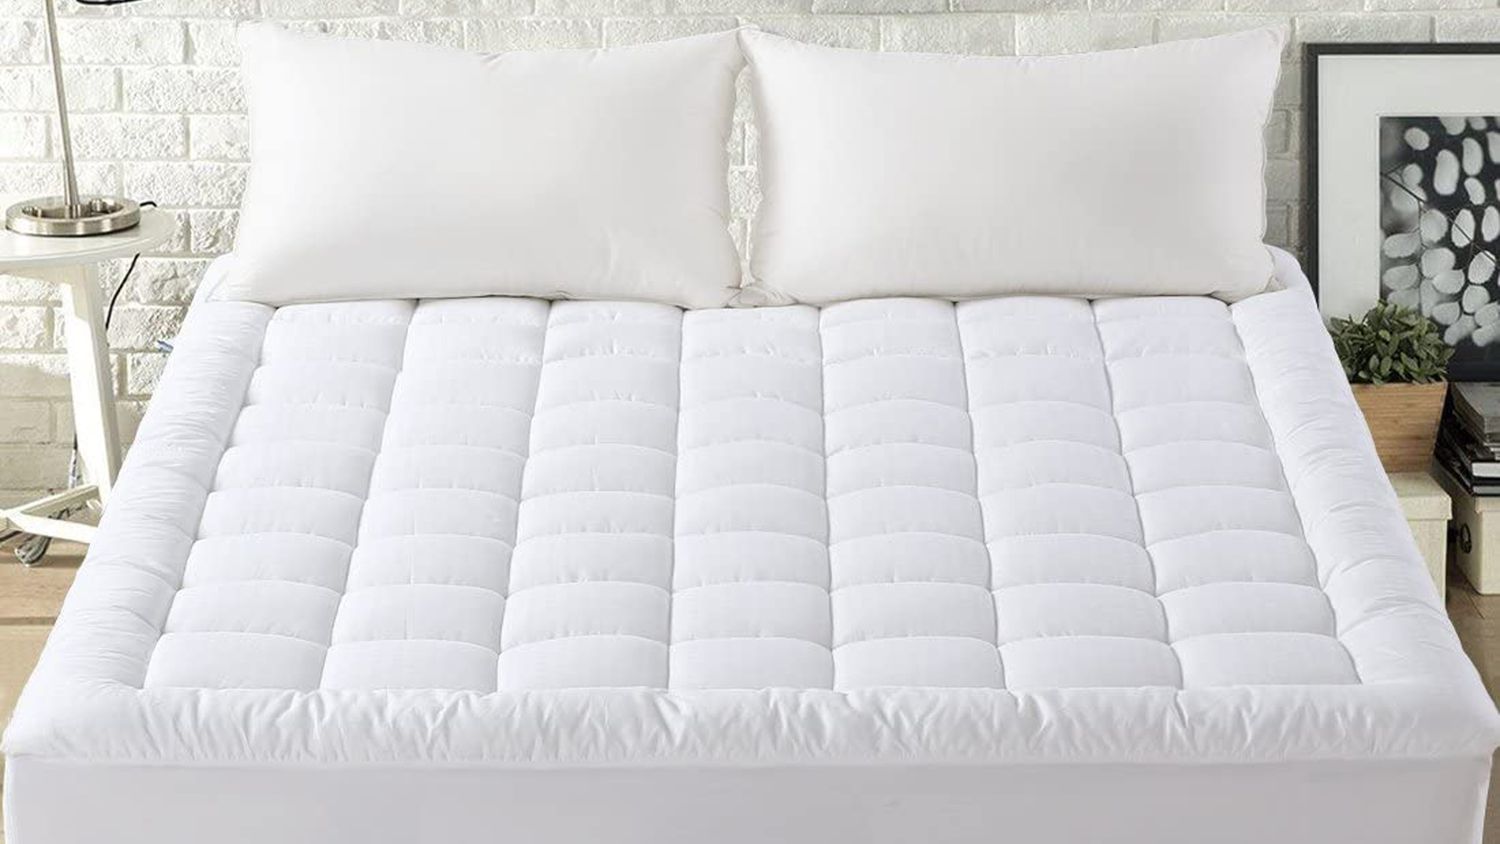 EASELAND Queen Size Mattress Pad Pillow Top Mattress Cover Quilted Fitted Mattress Protector